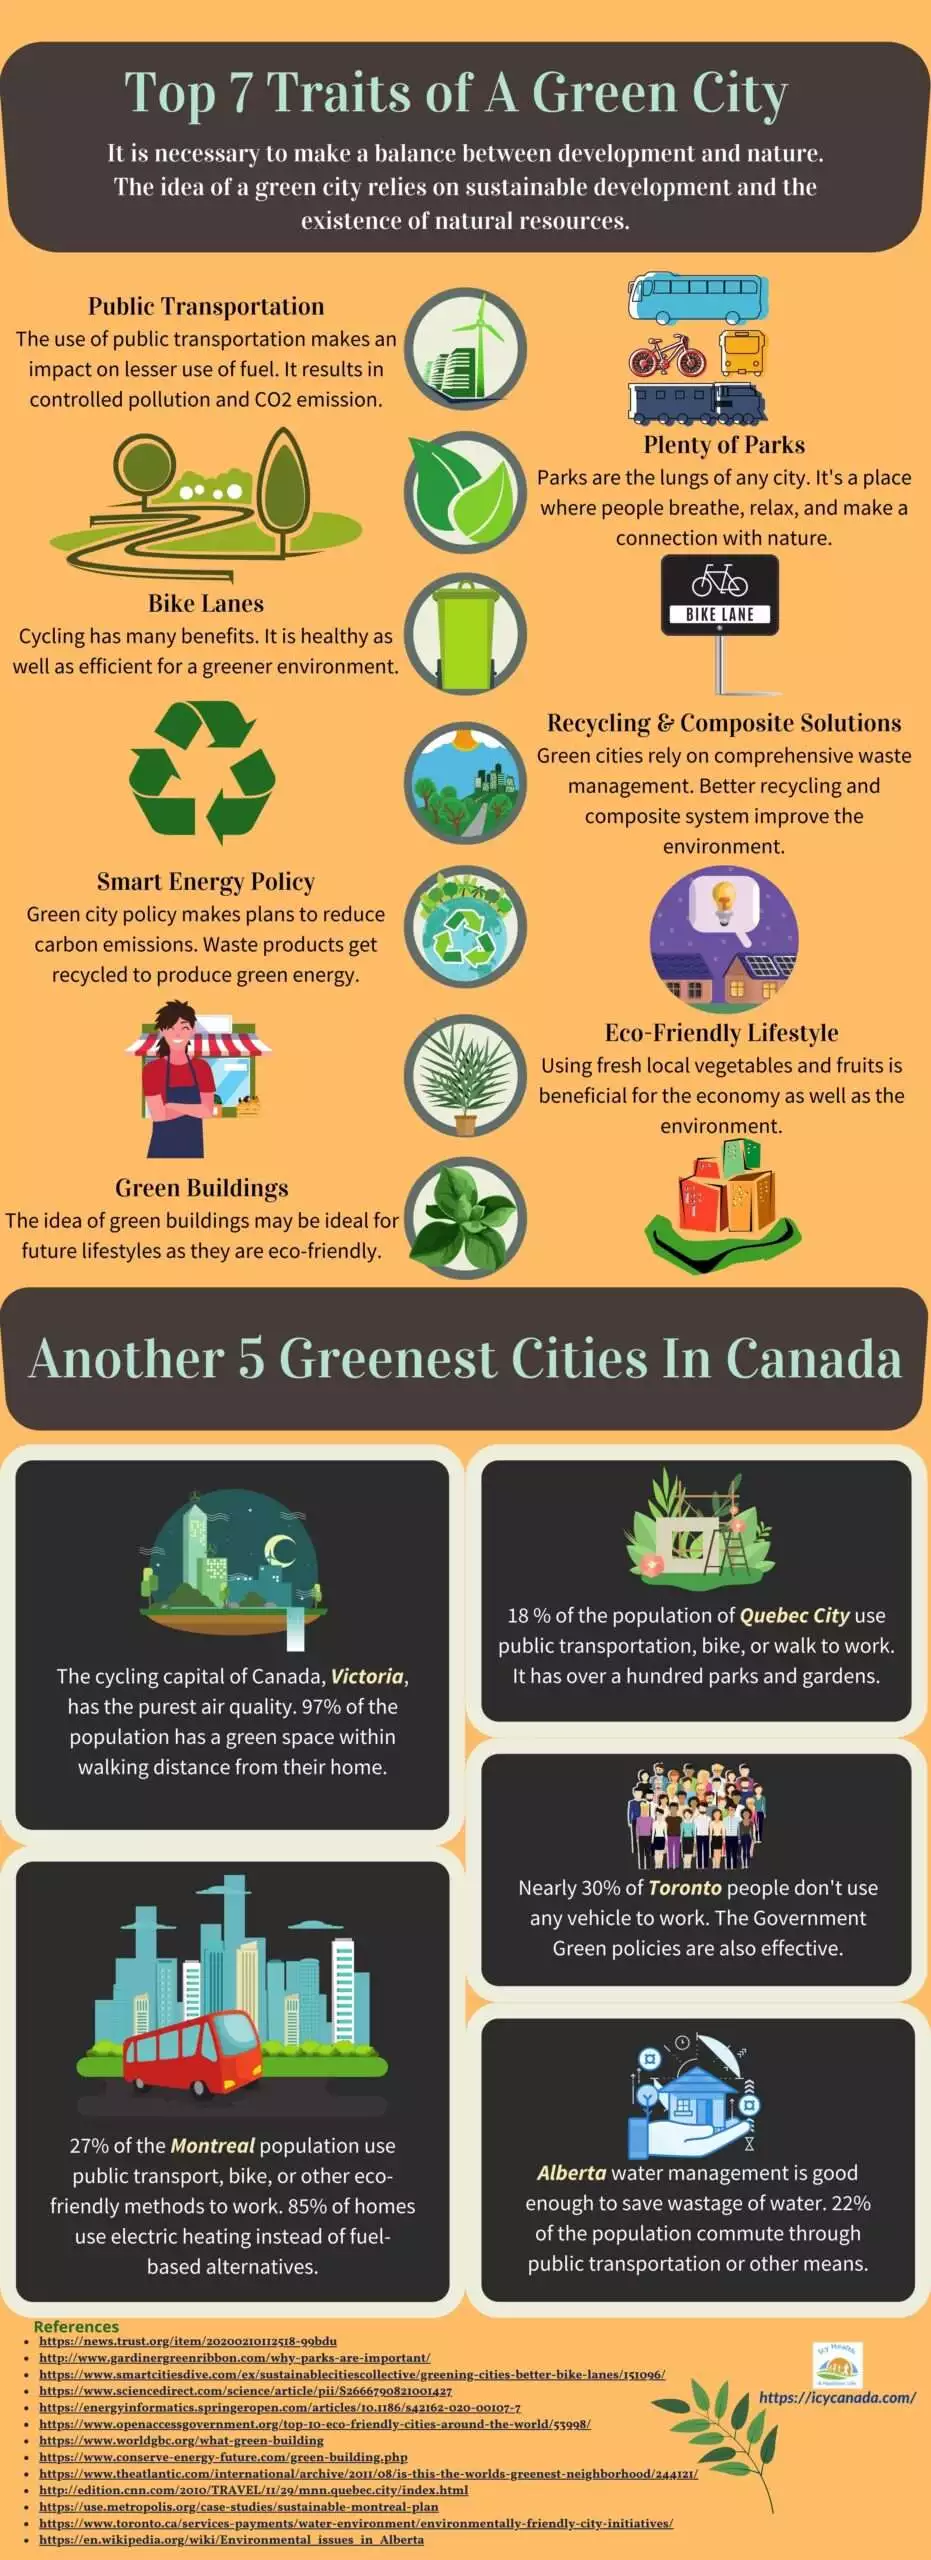 Top 7 Traits of A Green City